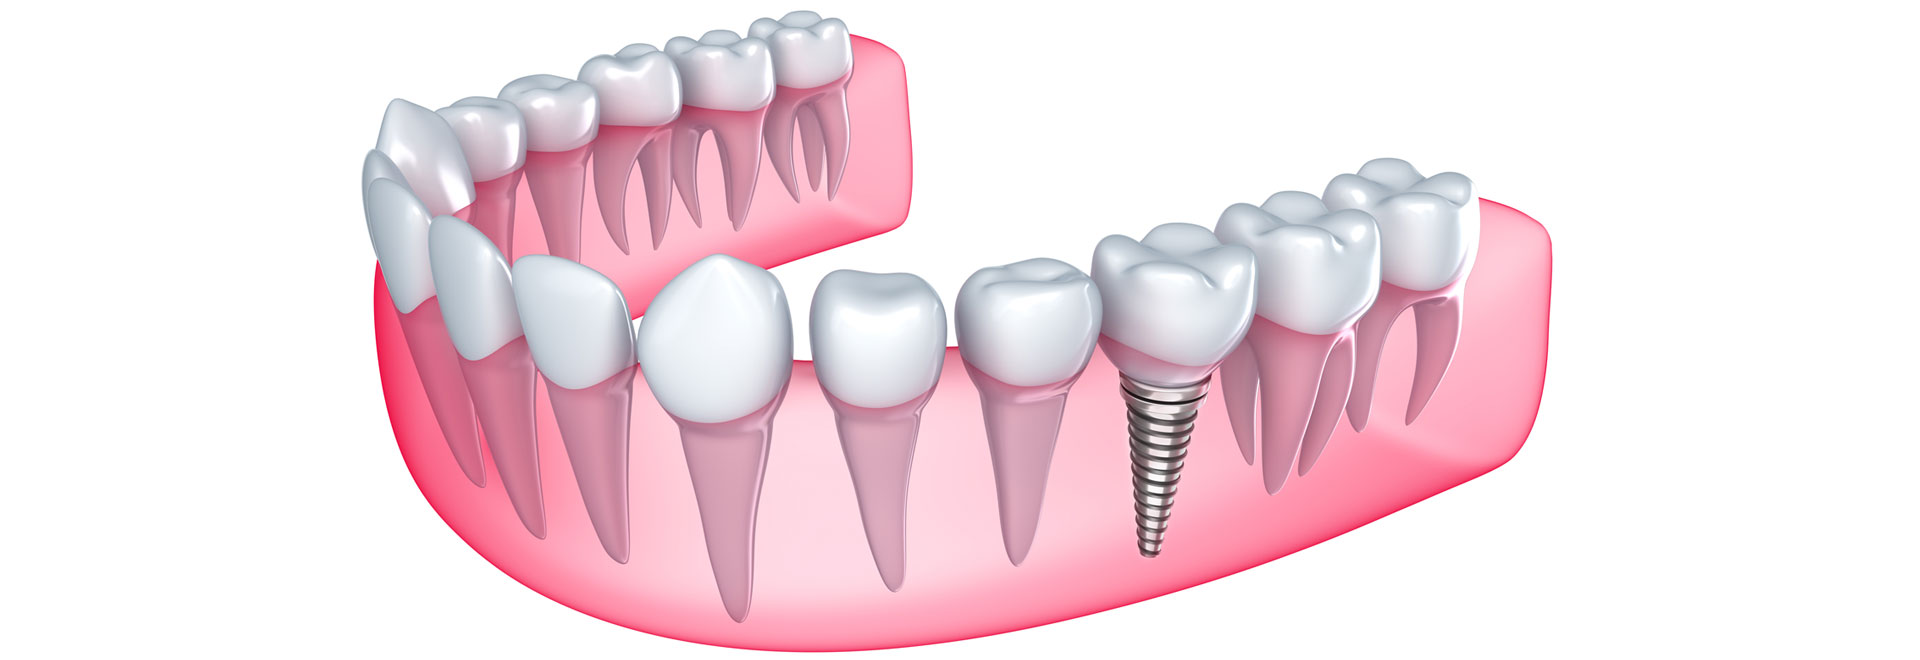 Dental implant in the gum